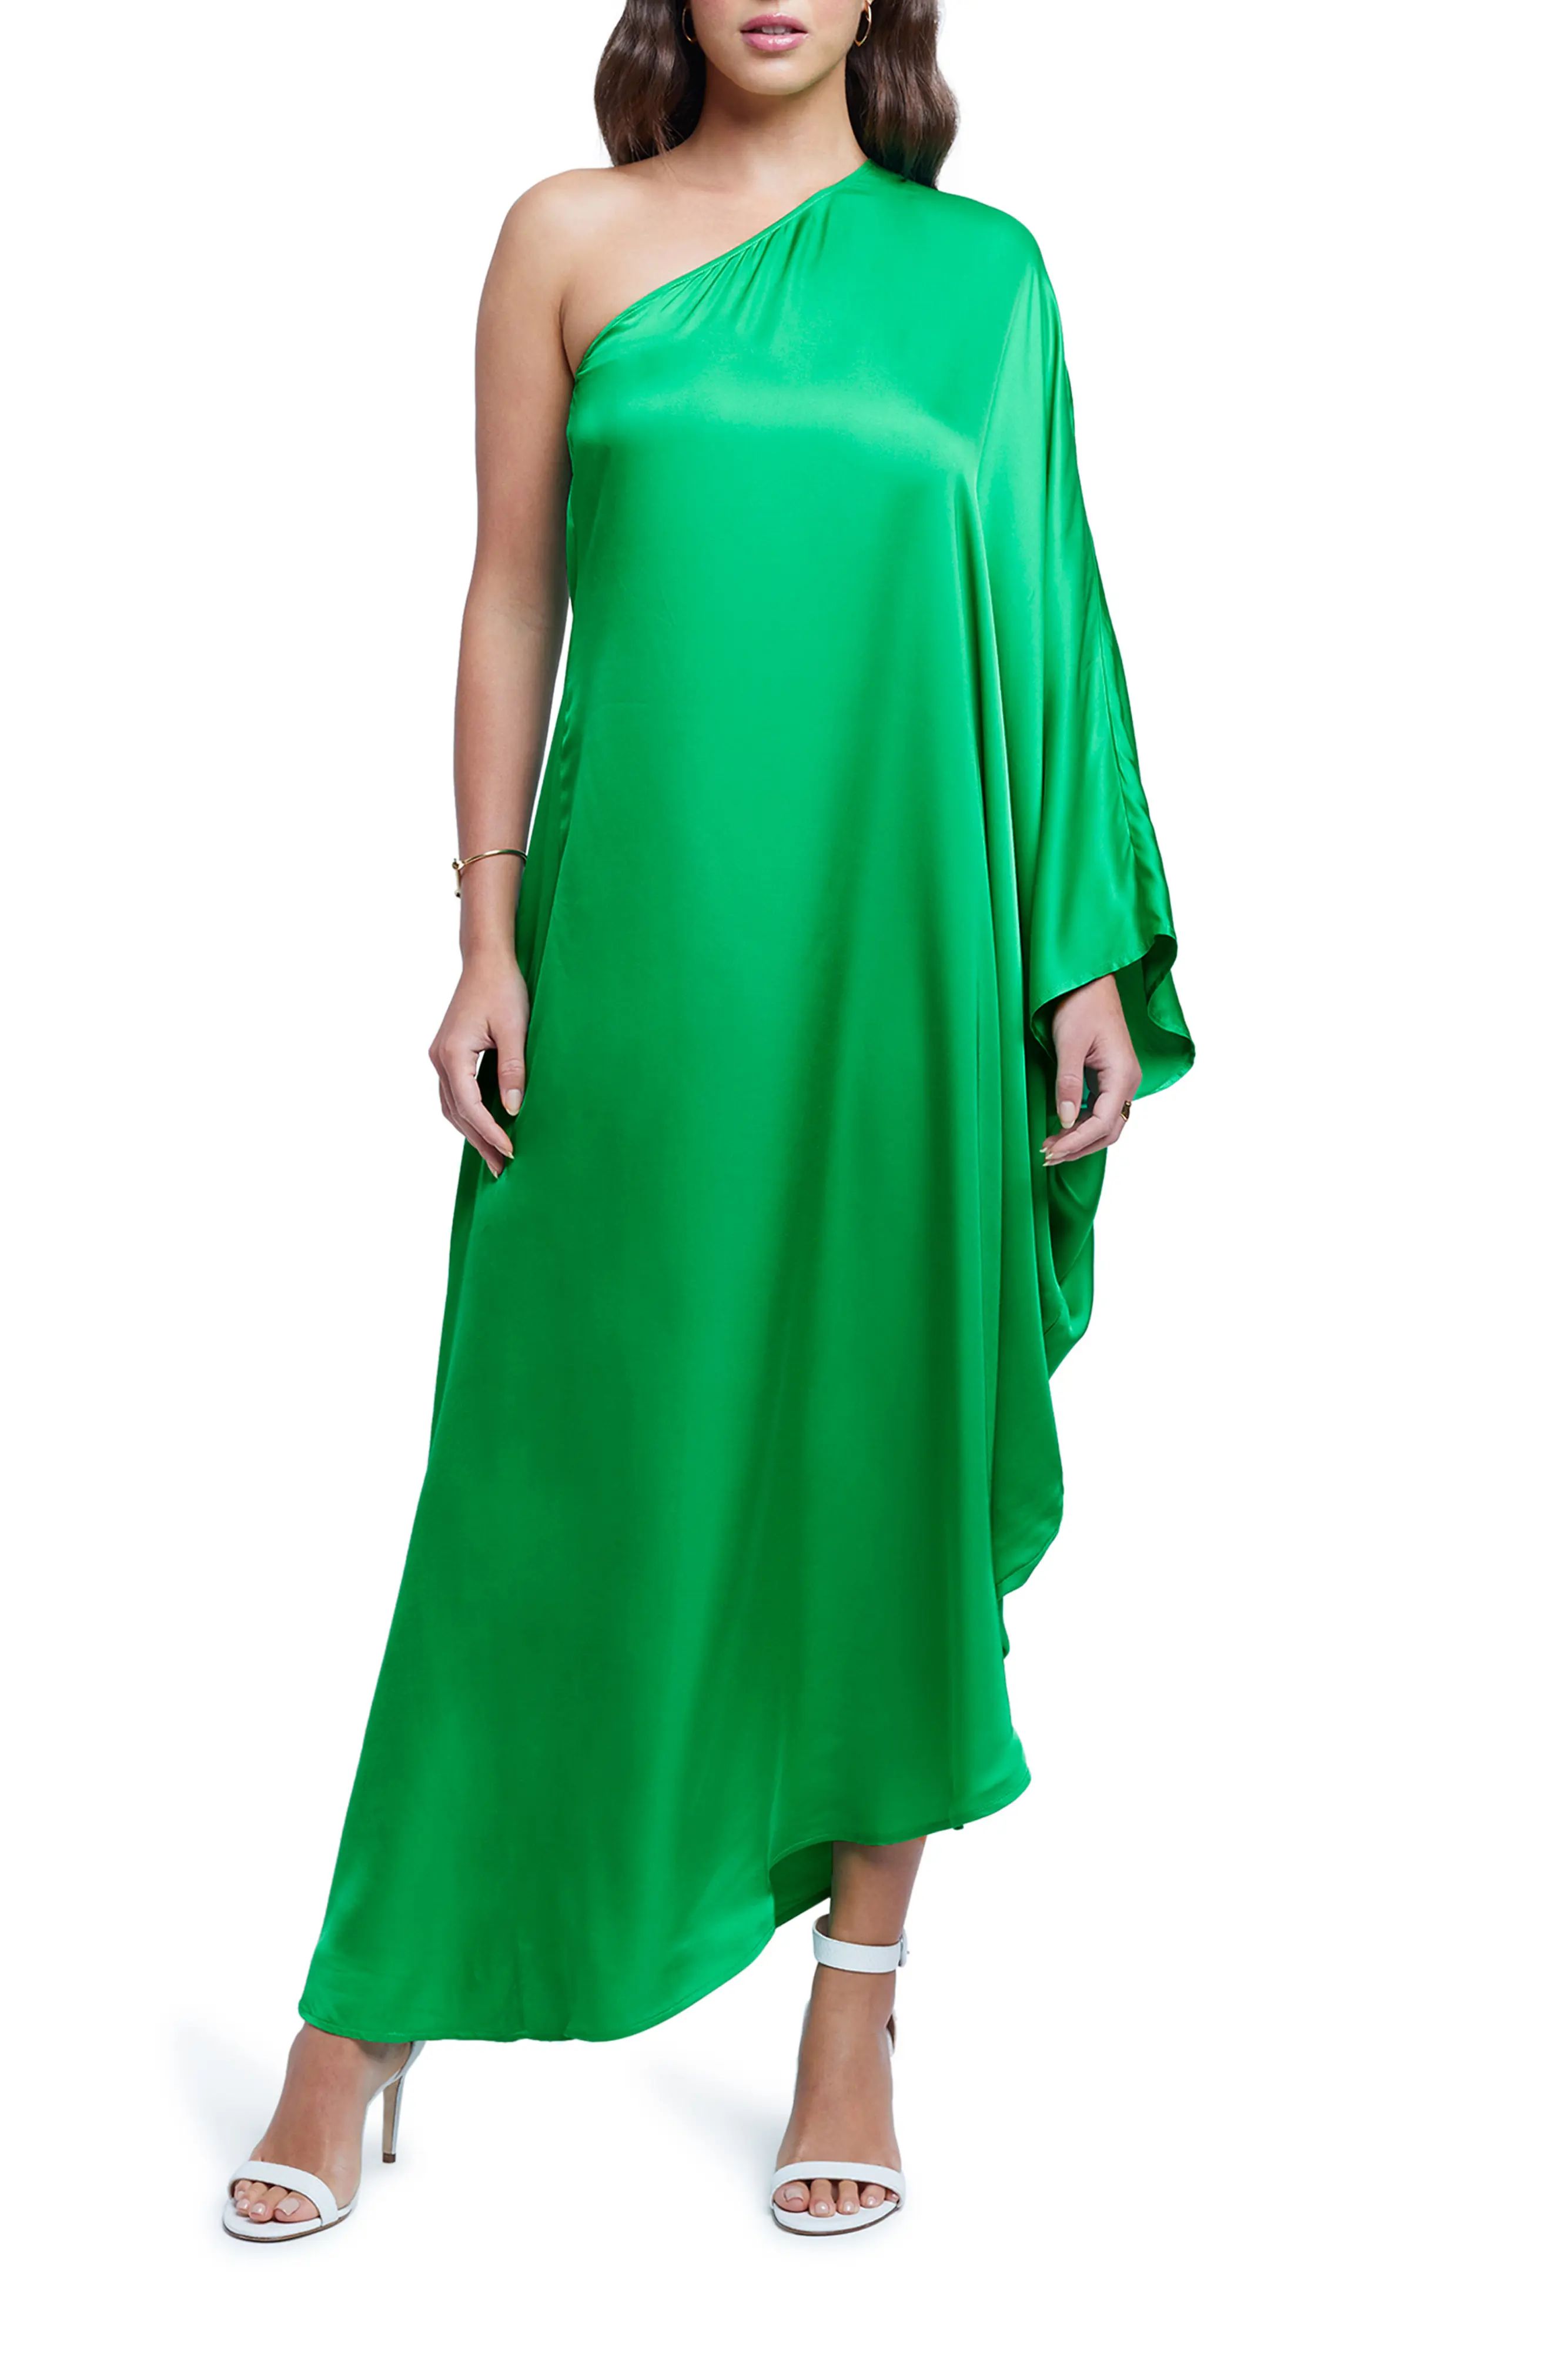 L'AGENCE Selena One-Shoulder Dress in Pop Green at Nordstrom, Size X-Small | Nordstrom